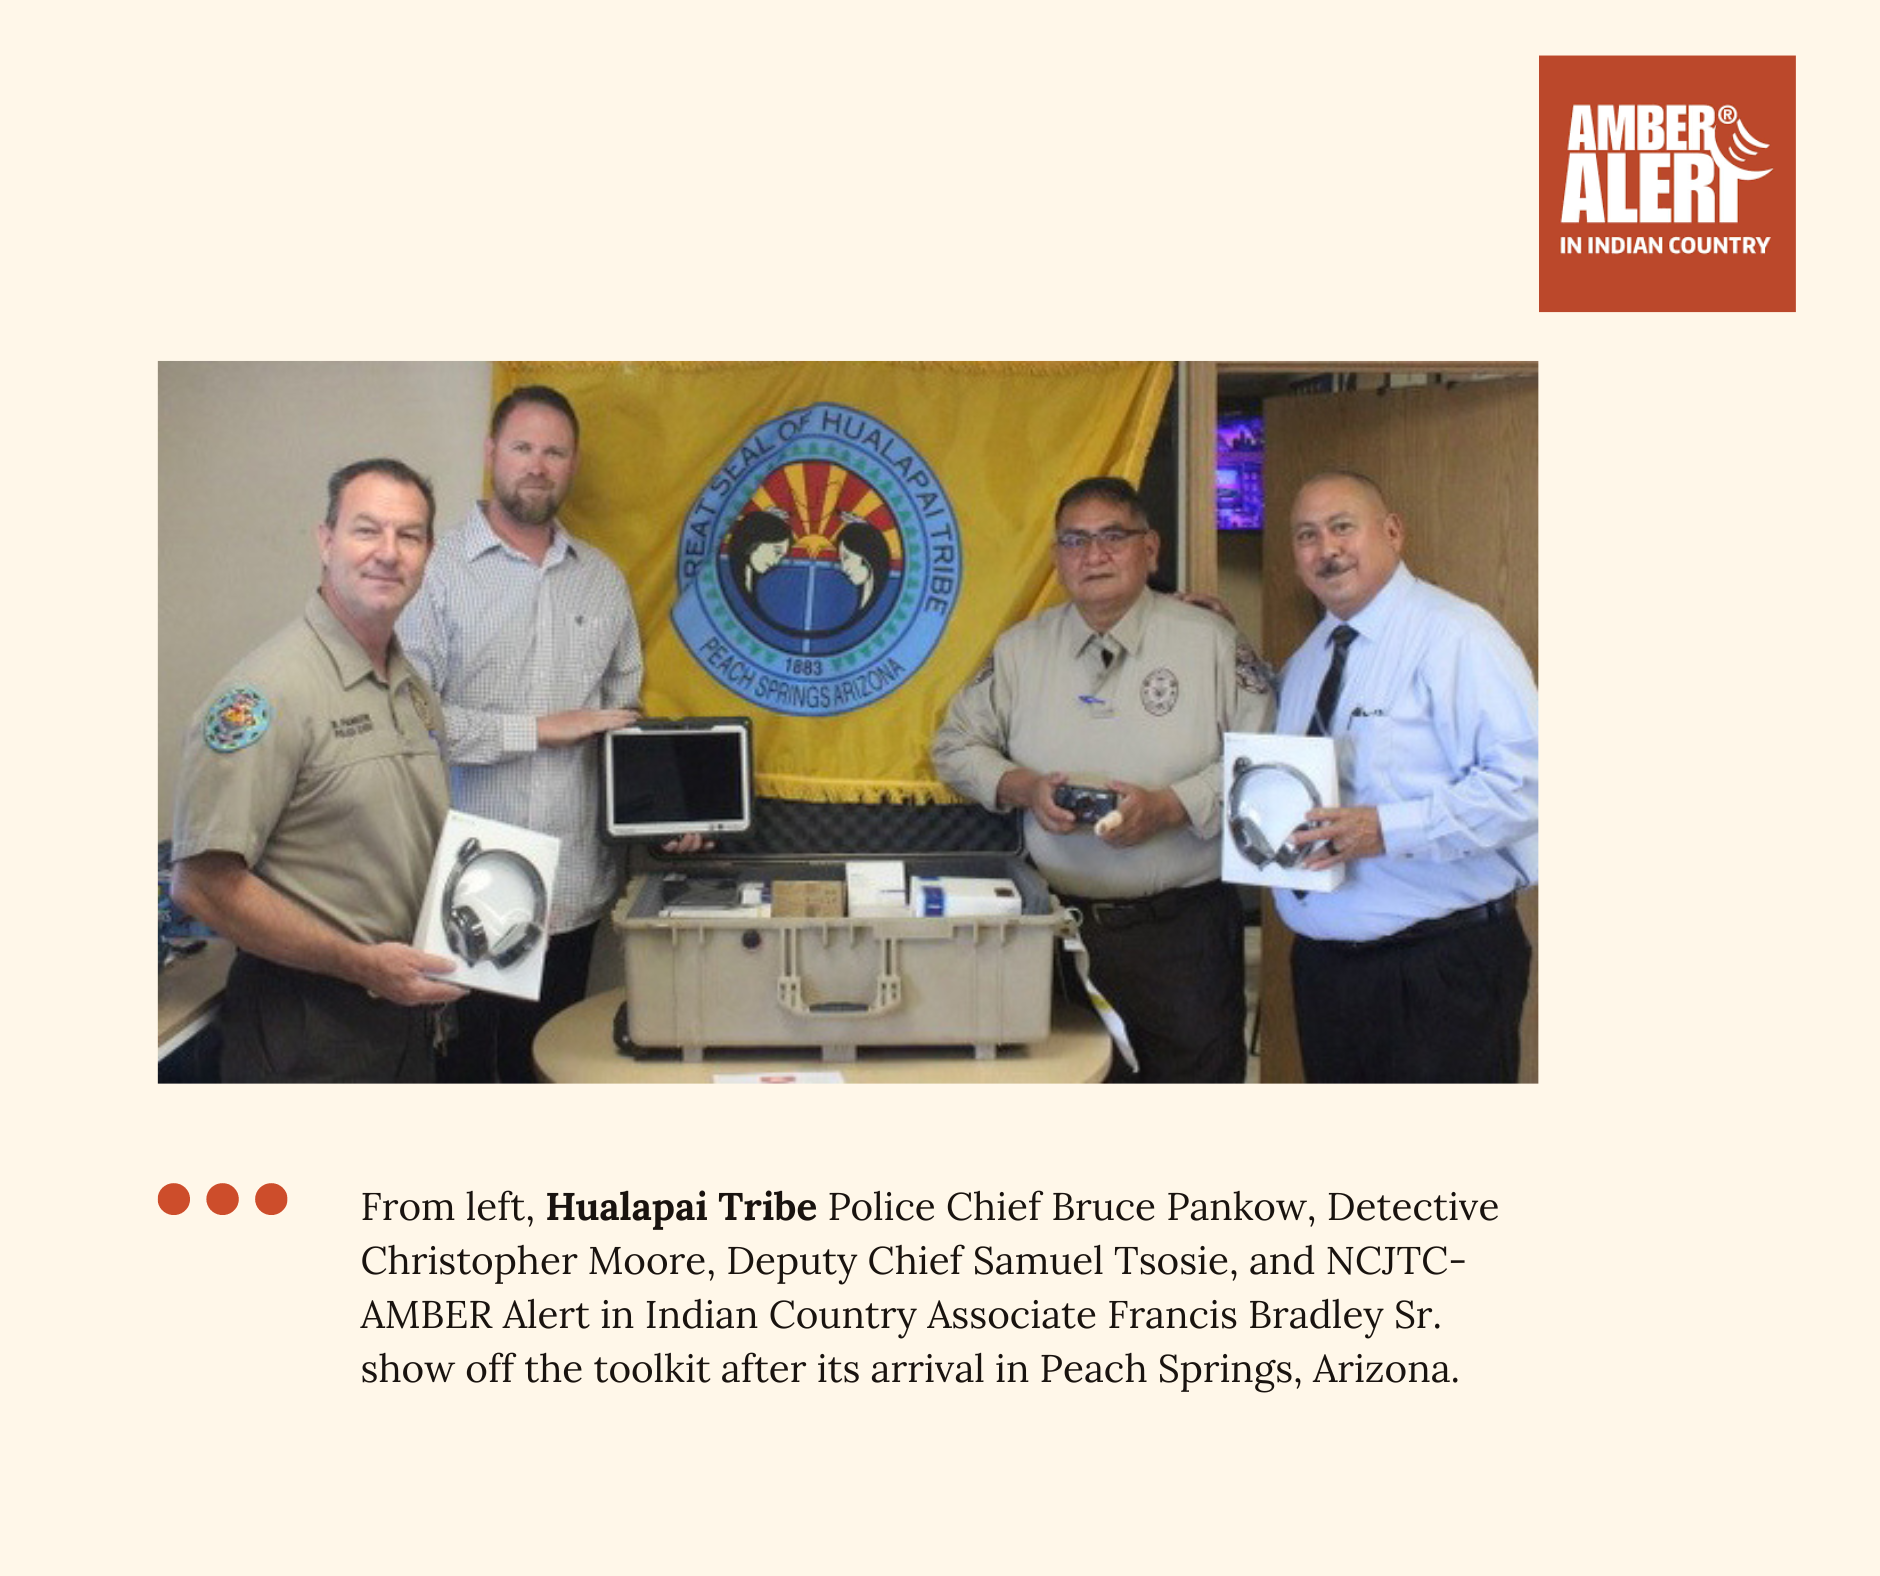 From left, Hualapai Tribe Police Chief Bruce Pankow, Detective Christopher Moore, Deputy Chief Samuel Tsosie, and NCJTC-AMBER Alert in Indian Country Associate Francis Bradley Sr. show off the toolkit after its arrival in Peach Springs, Arizona.